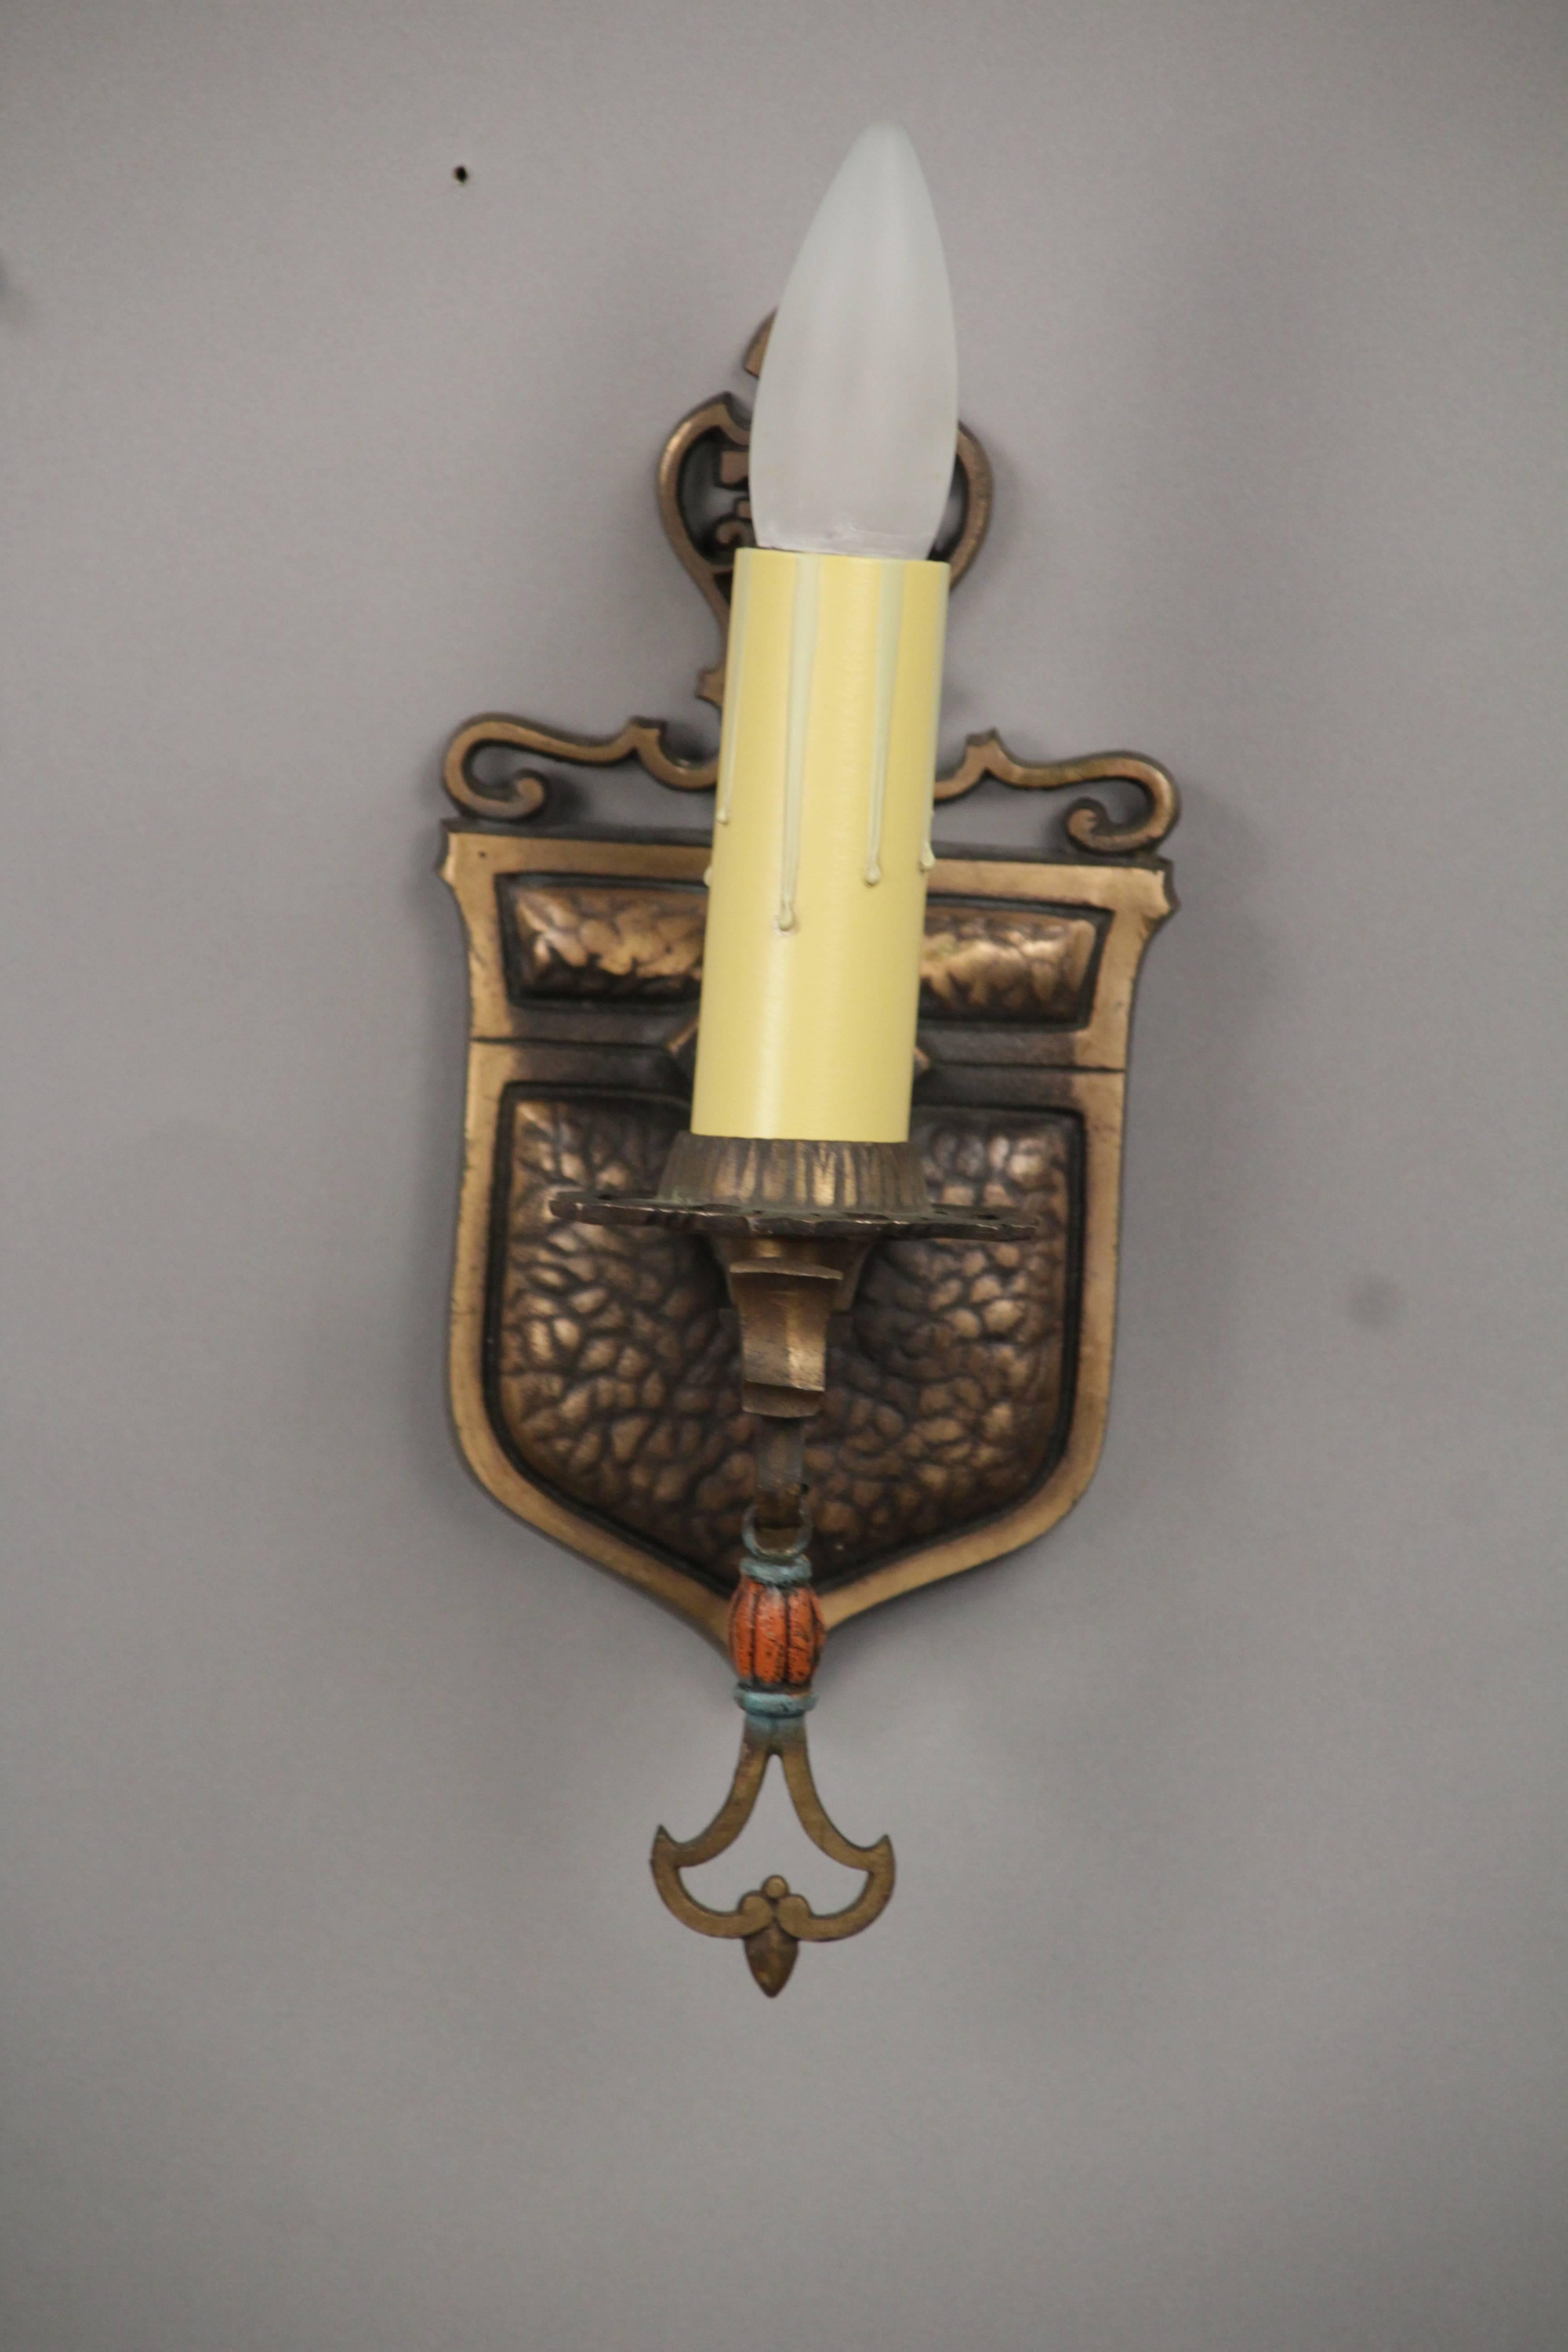 Sold and priced individually. 1 of 6 bronze sconce with shield motif.